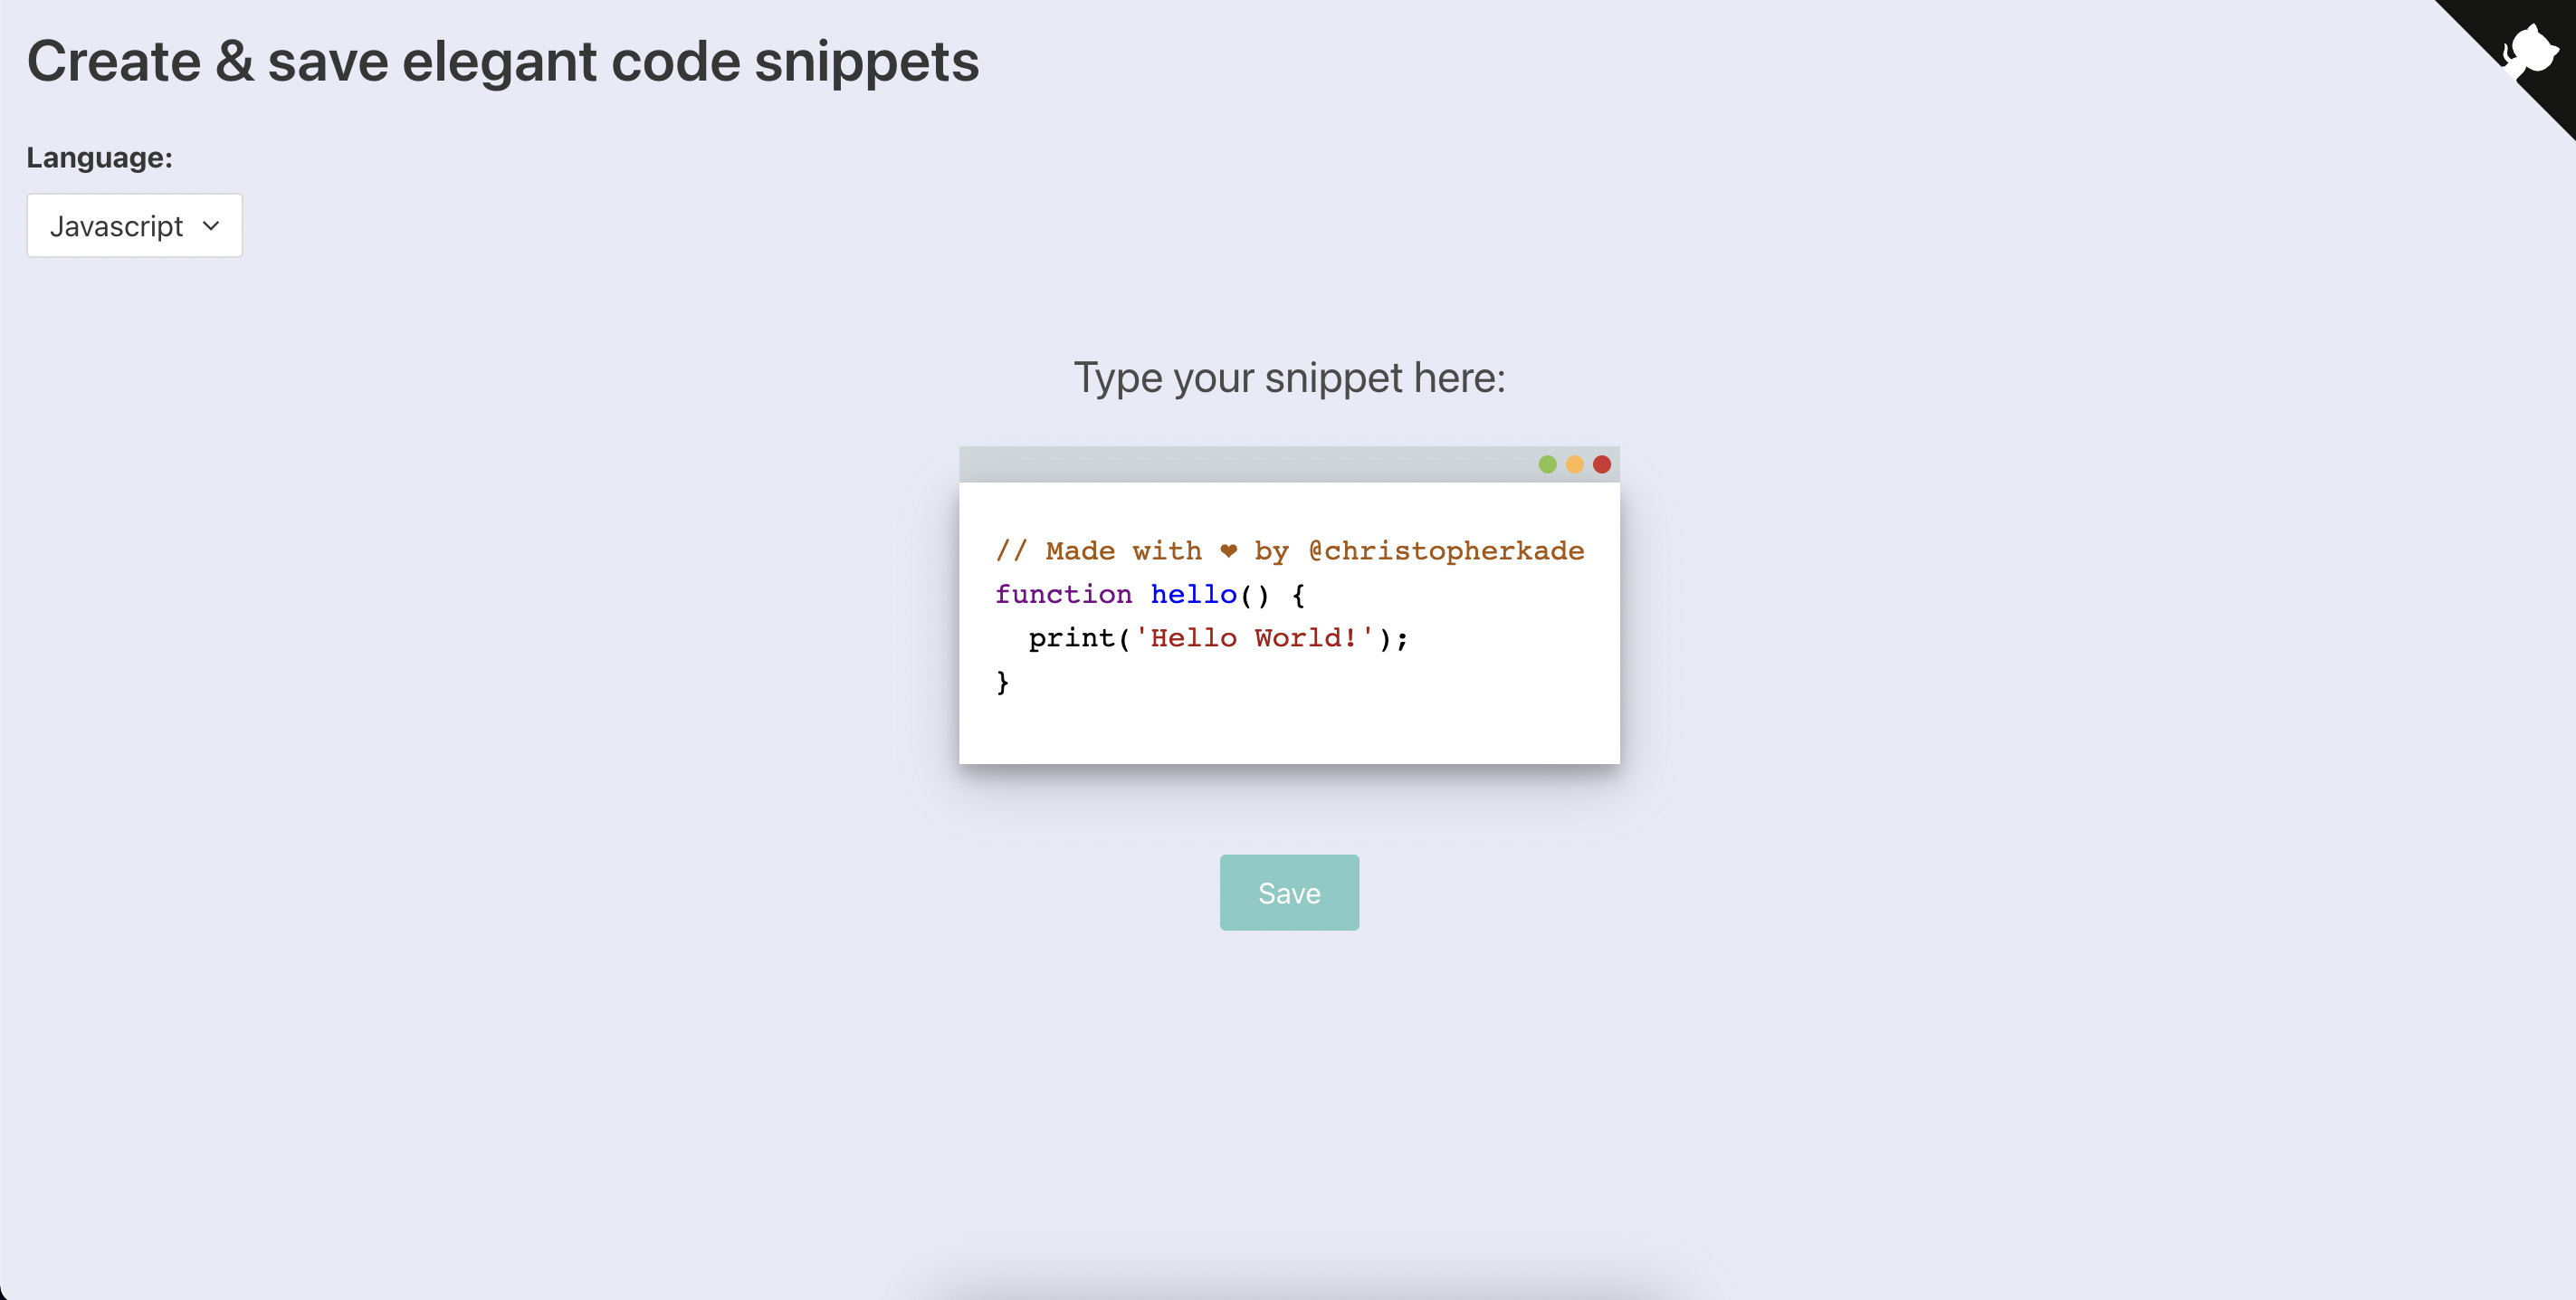 Generate code snippets to easily share with your colleagues